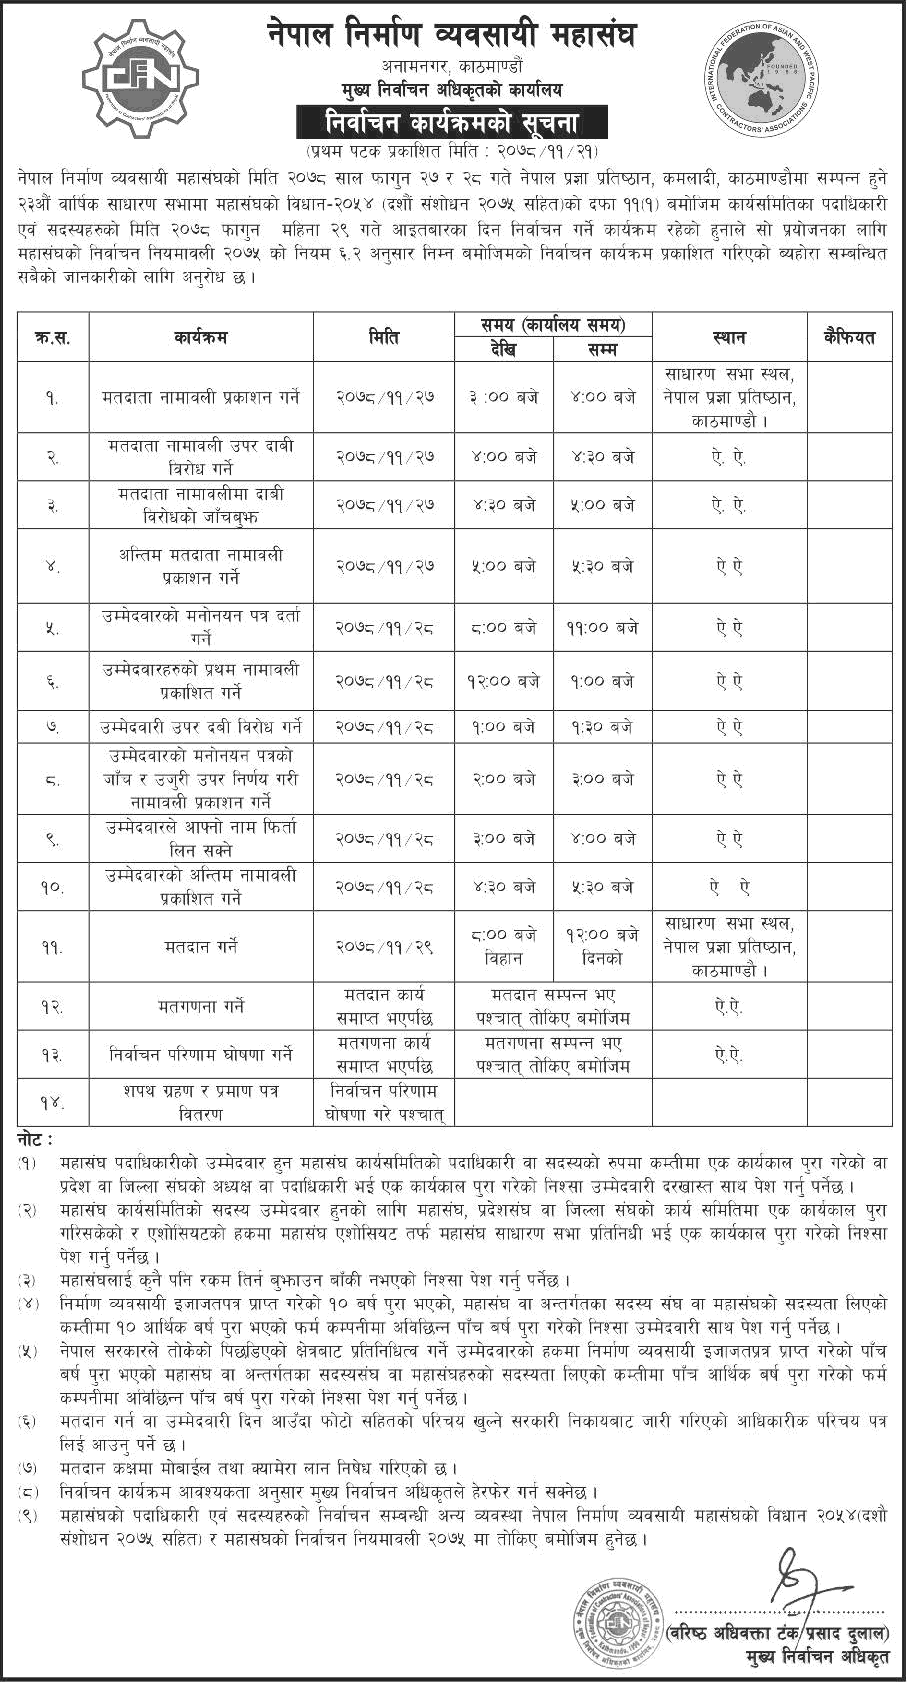 Federation Of Contractors Associations of Nepal (FCAN) Election Schedule